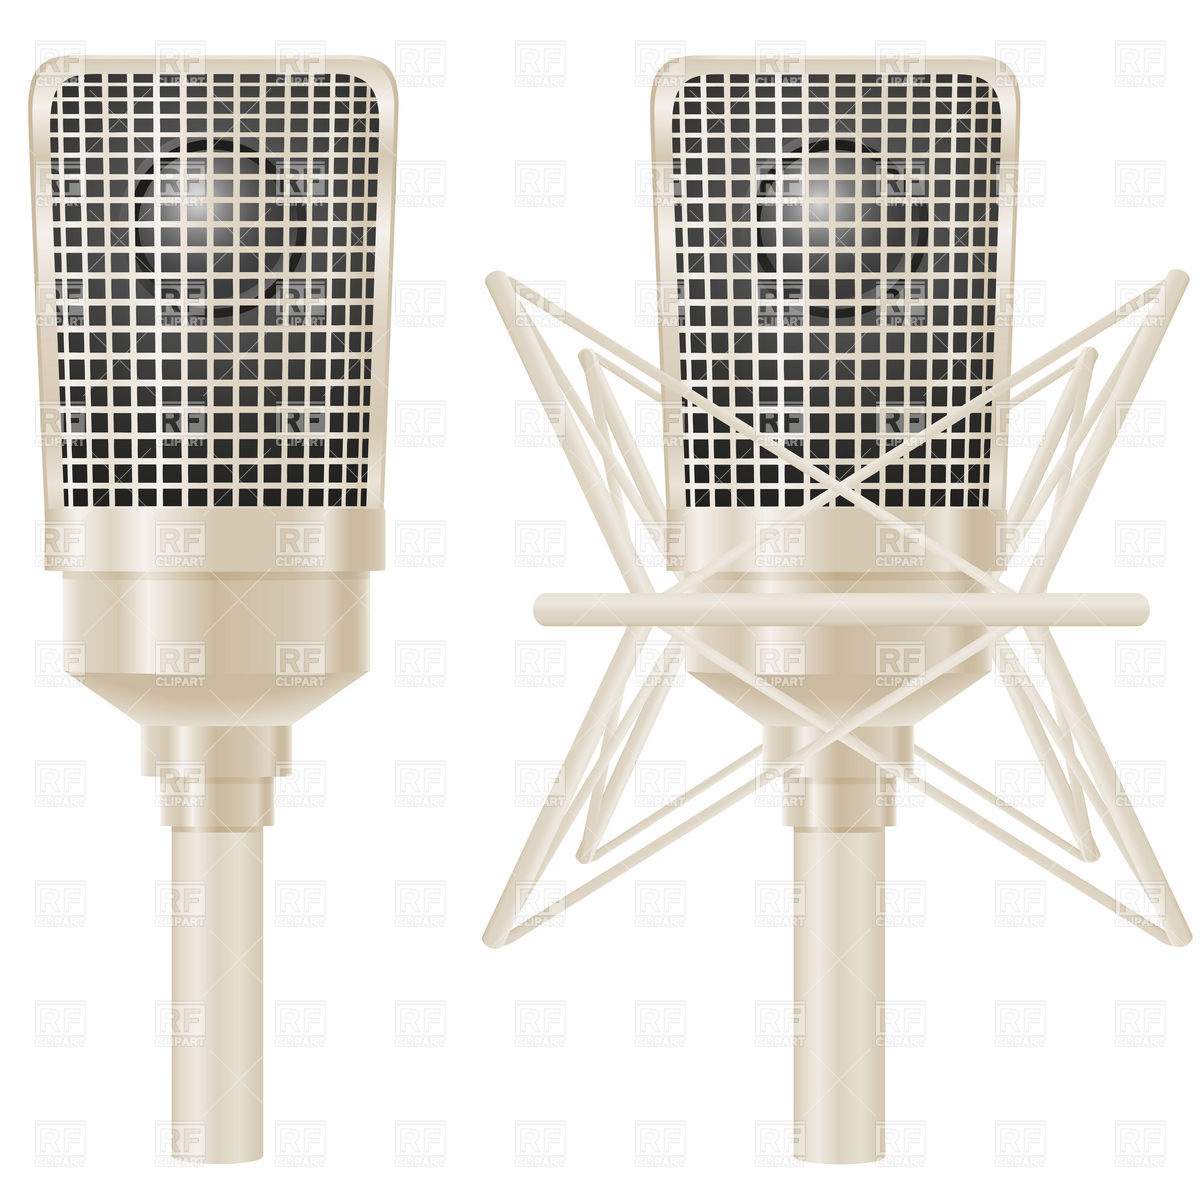 Professional Studio Microphone Objects Download Royalty Free Vector